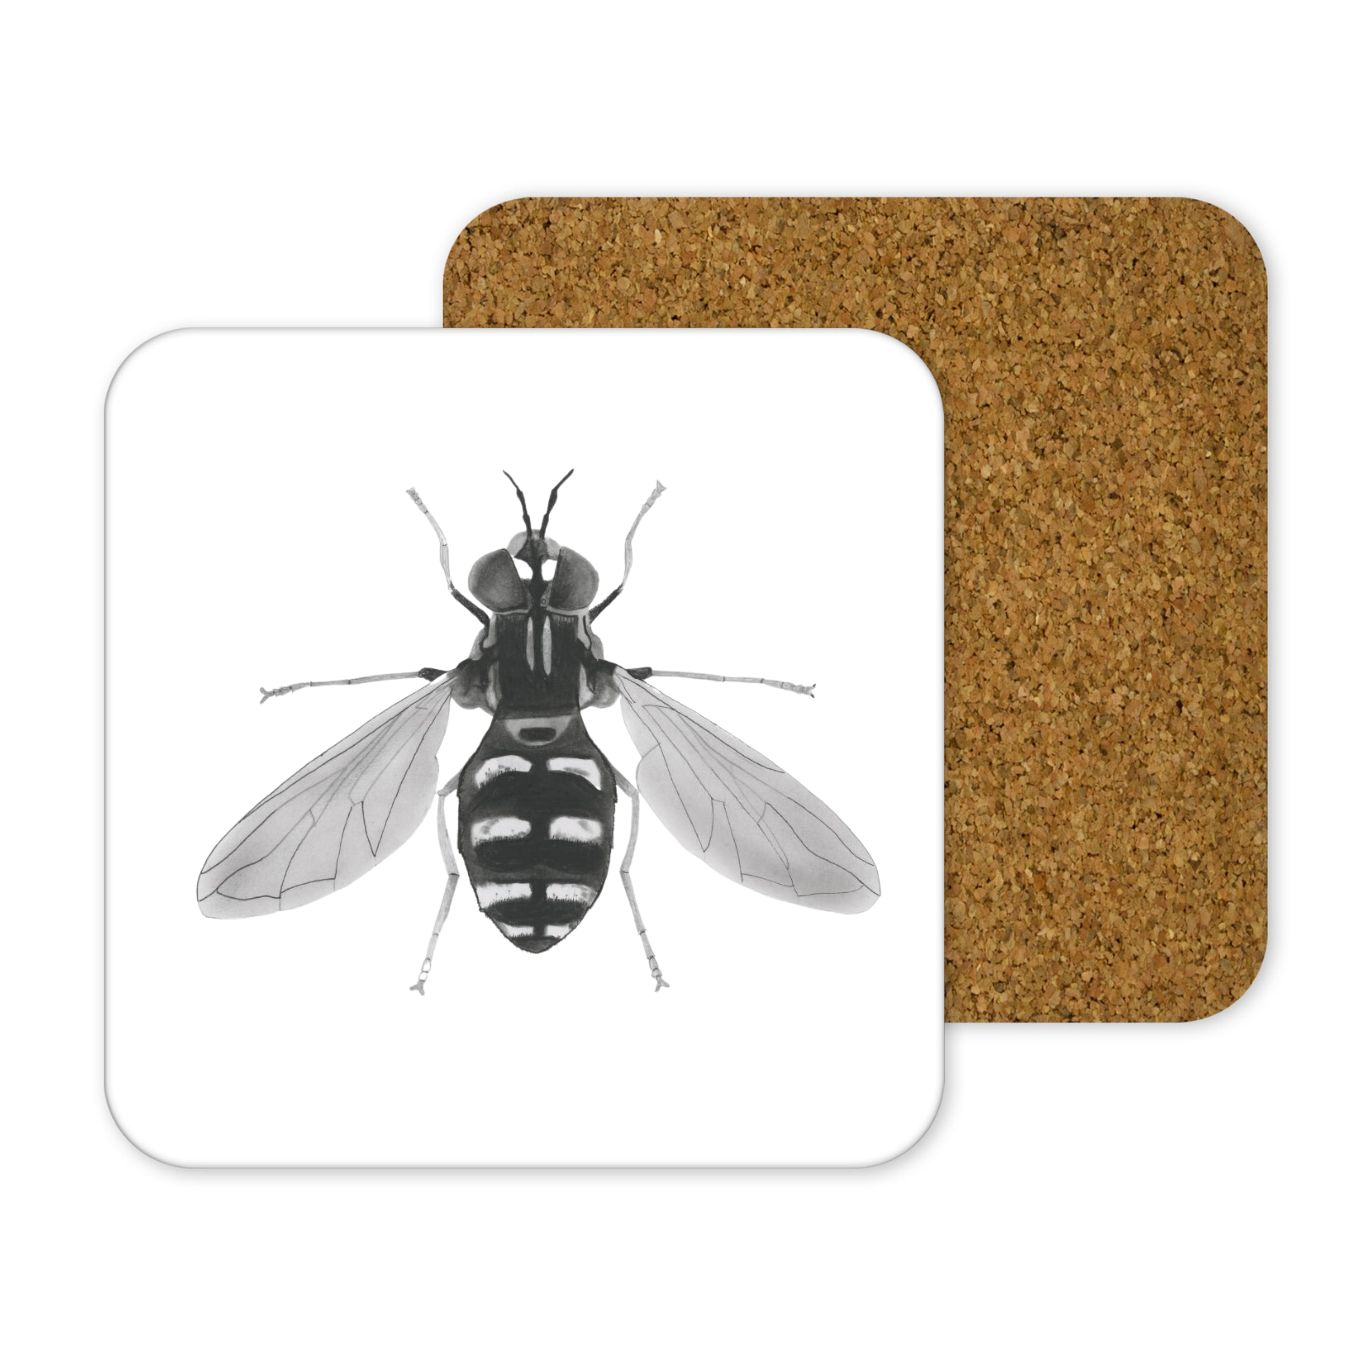 Hover Fly Drinks Coaster From Libra Fine Arts 